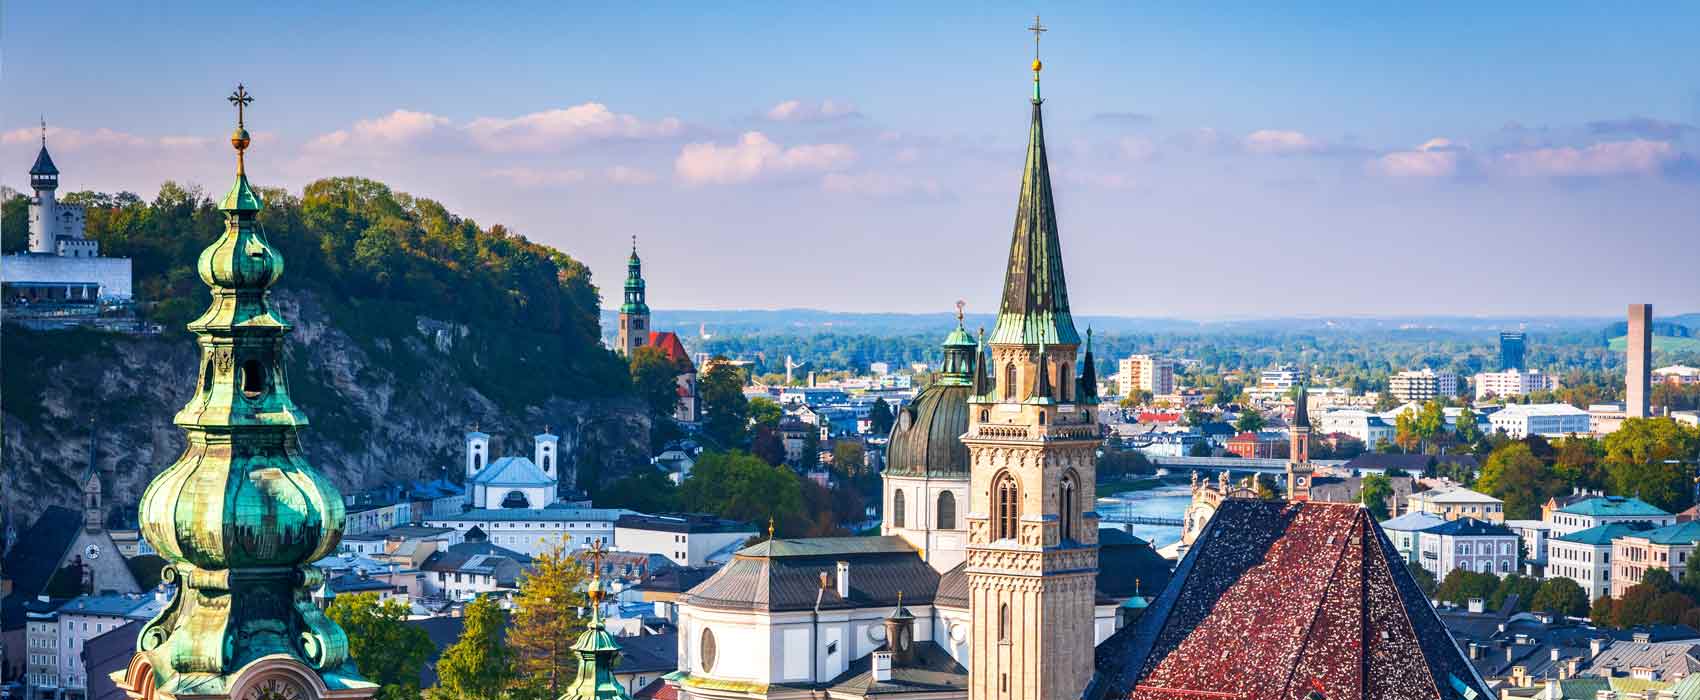 Salzburg from 3 to 7/8: The stars of the 2023 Festival